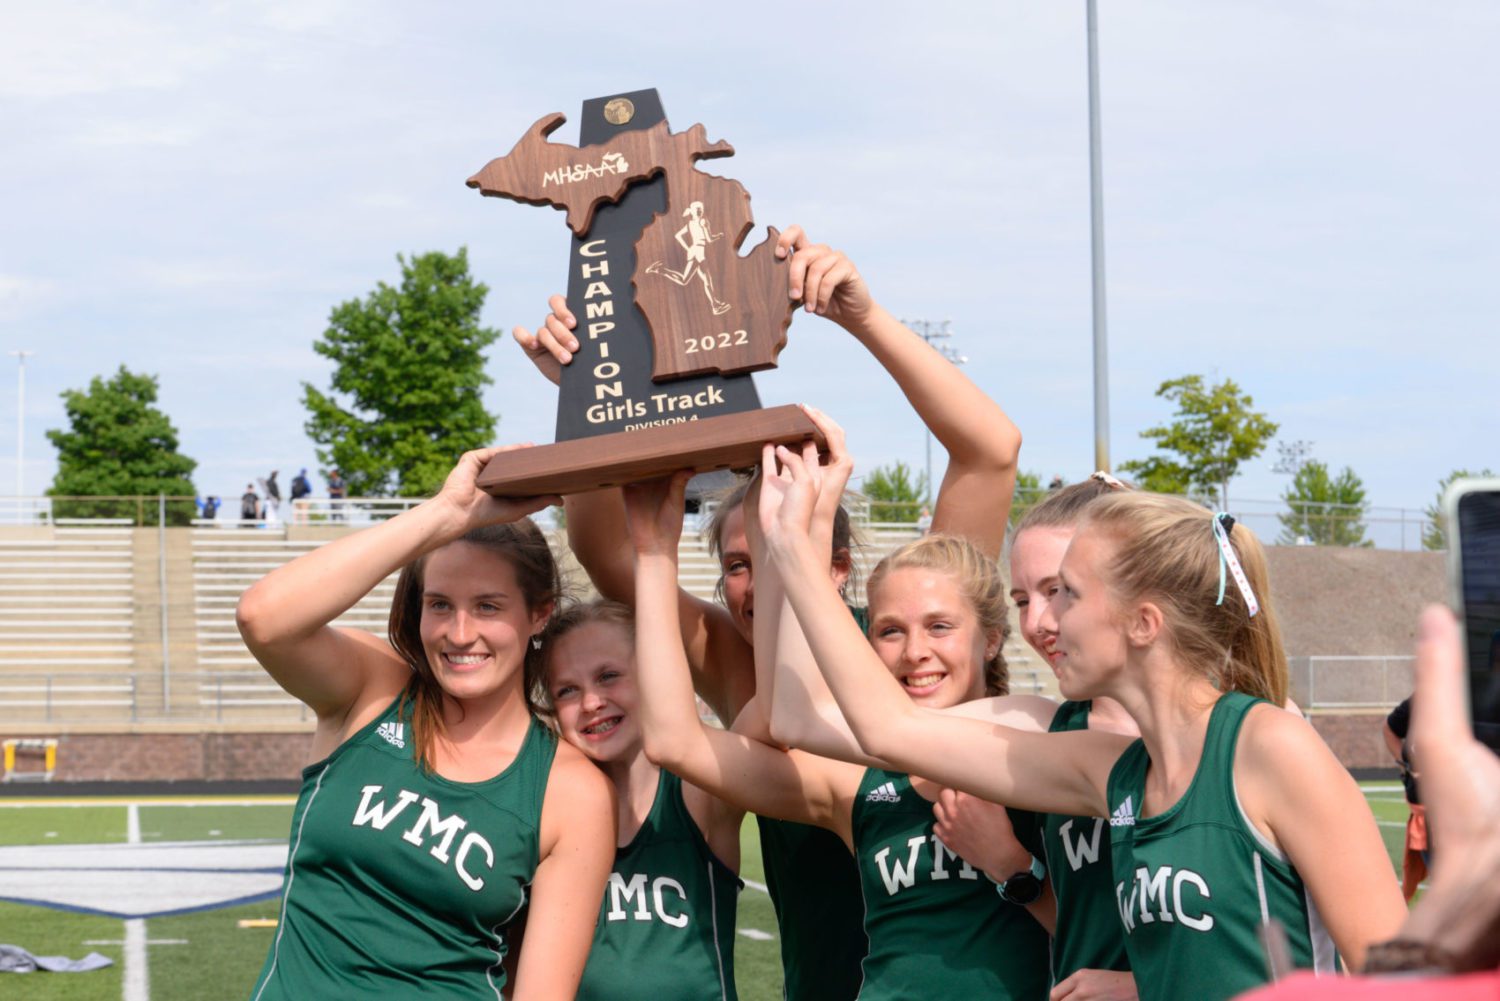 Western Michigan Christian girls track team makes history, wins first-ever state championship in Division 4